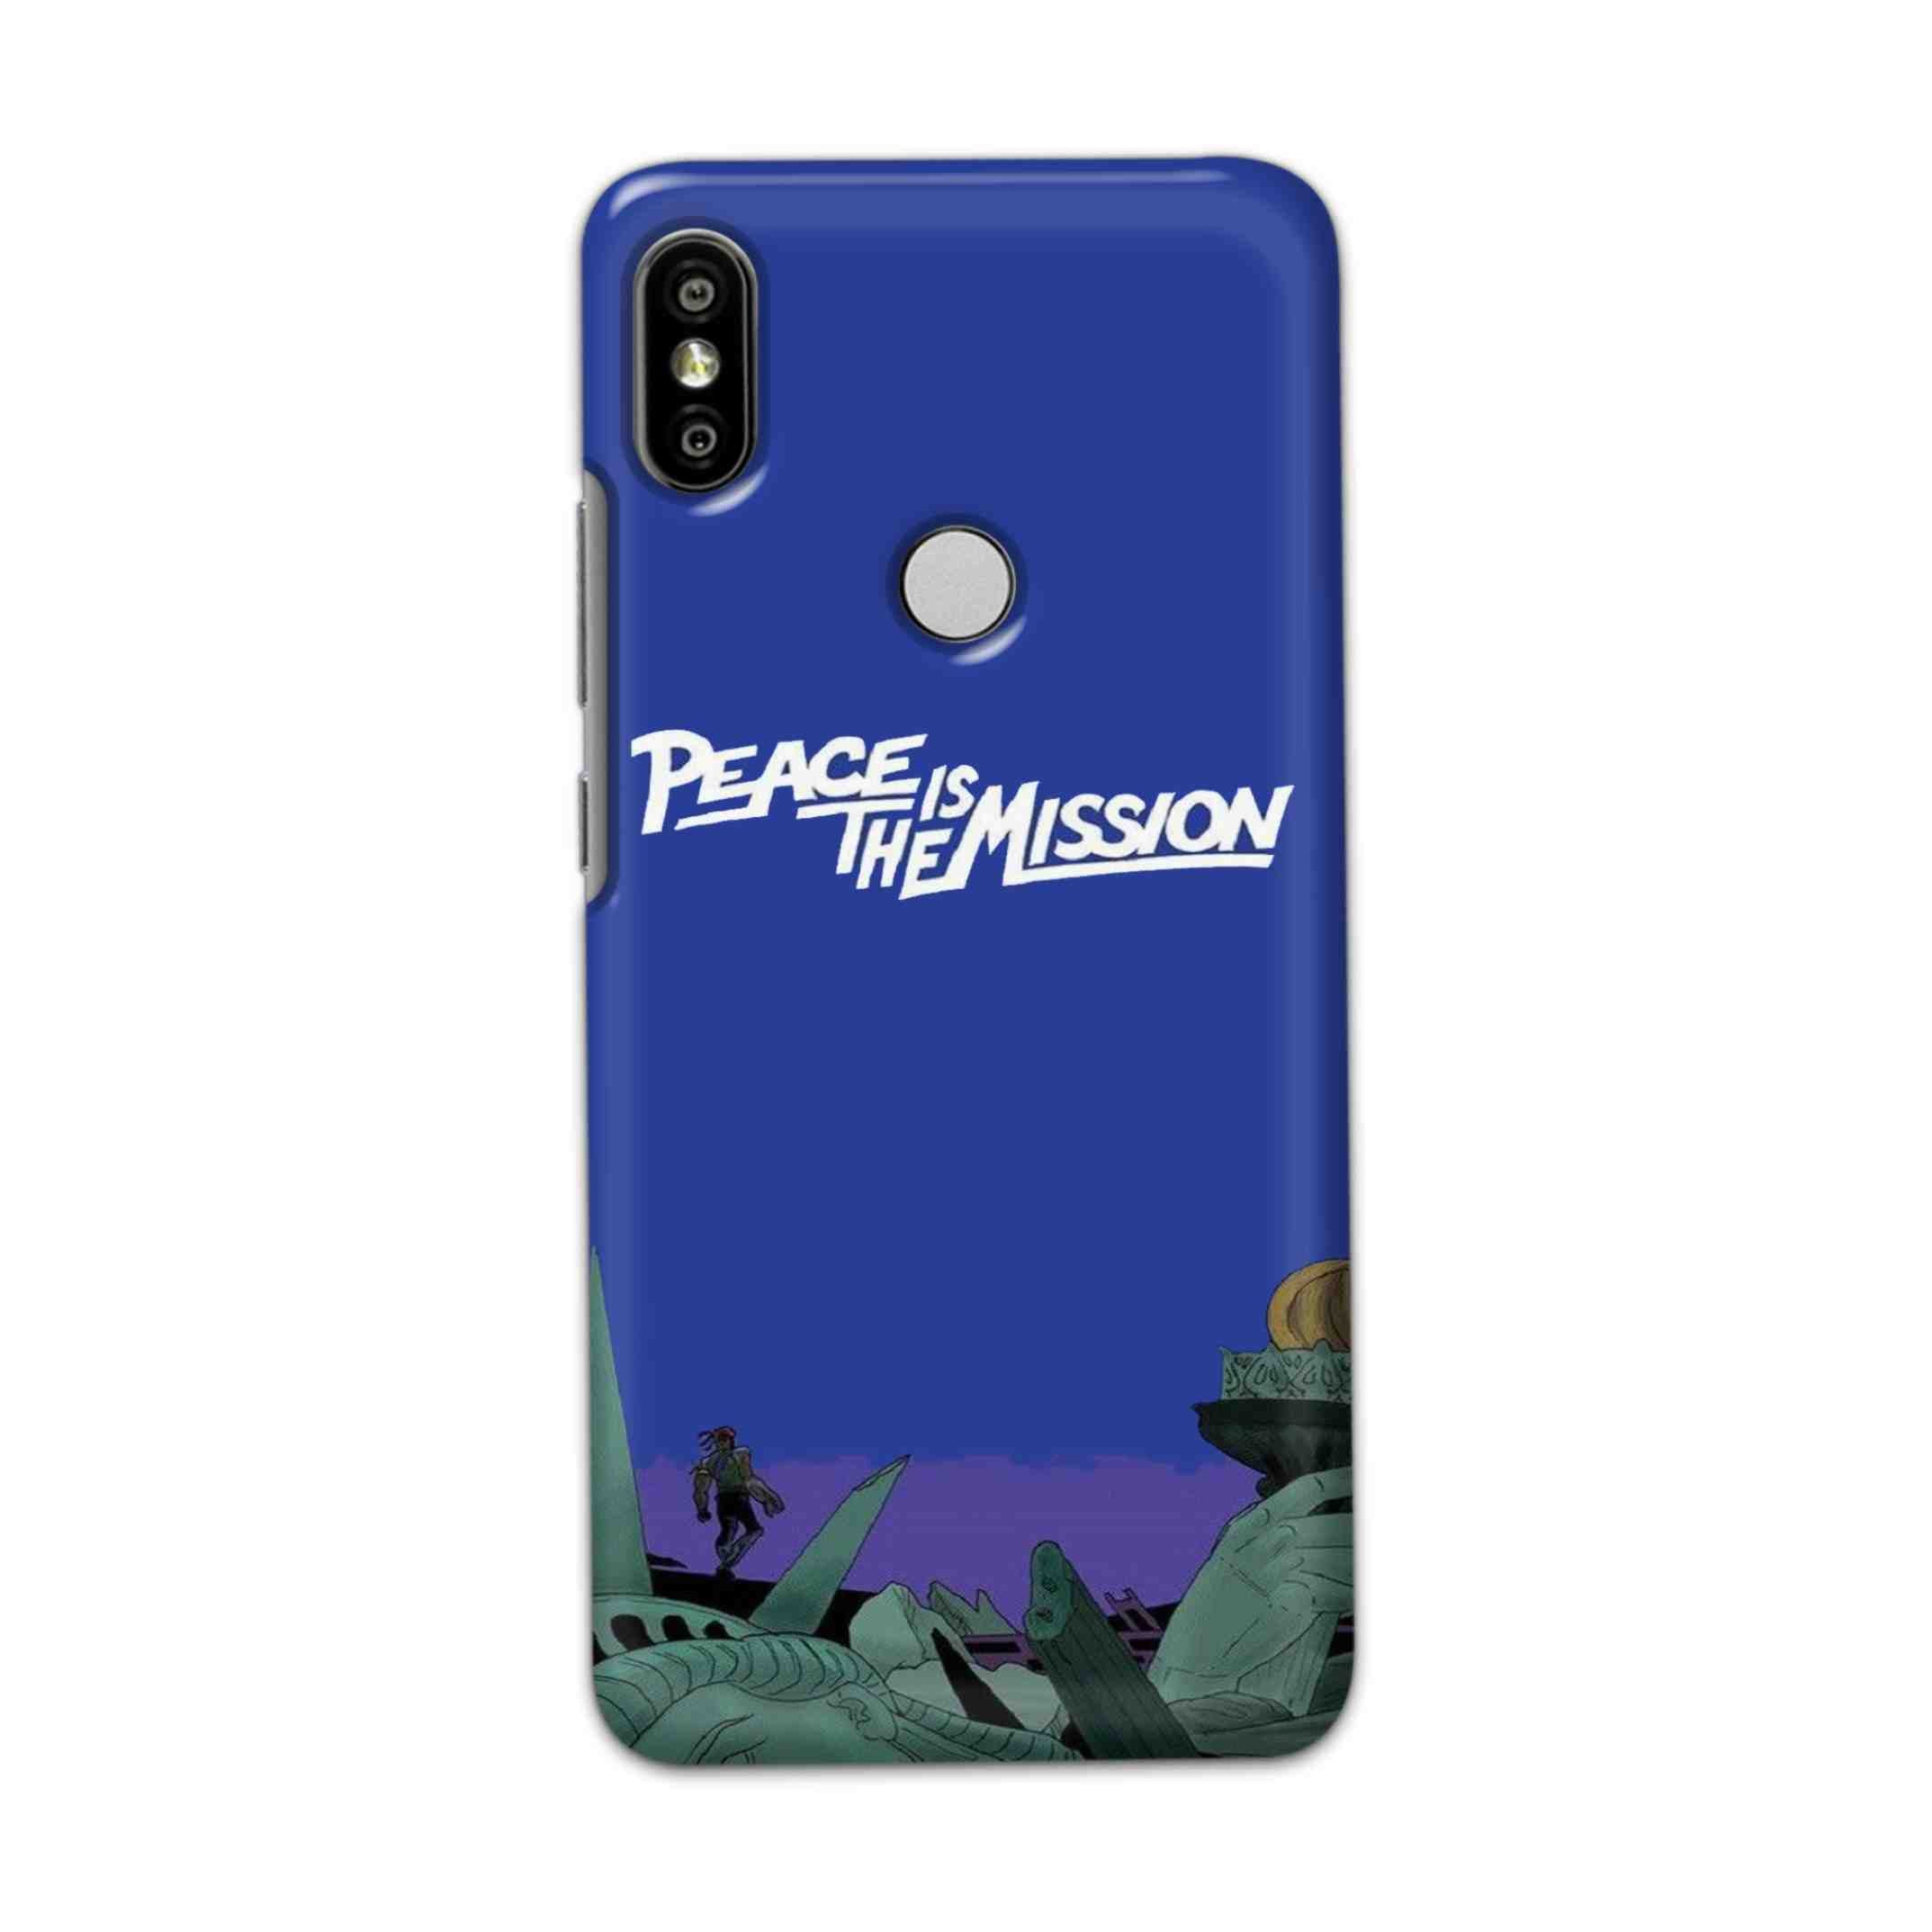 Buy Peace Is The Misson Hard Back Mobile Phone Case Cover For Redmi S2 / Y2 Online